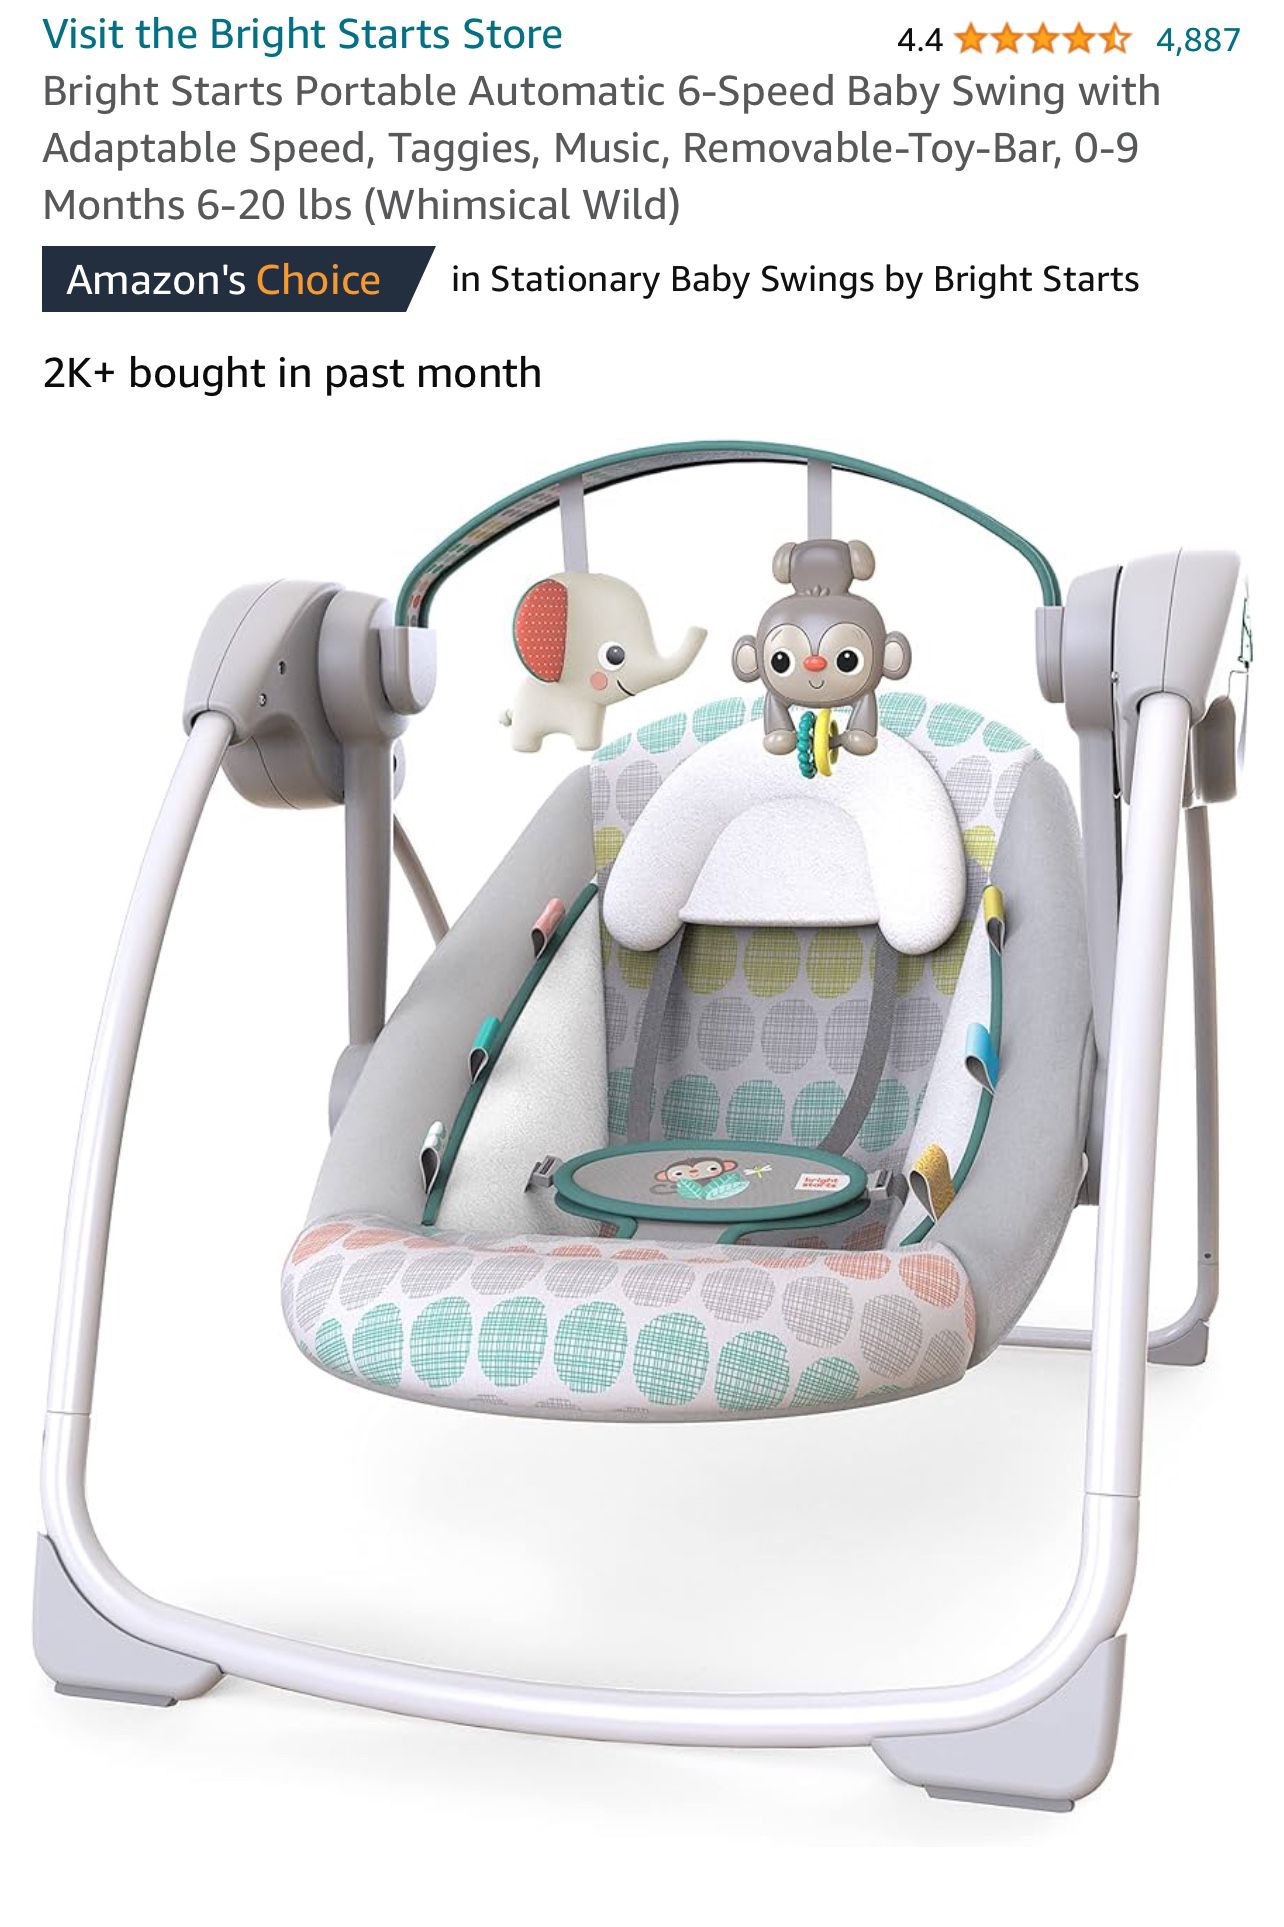 Bright Starts Portable Automatic 6-peeds Baby Swing With Adaptable Speed Taggies Music Removable 